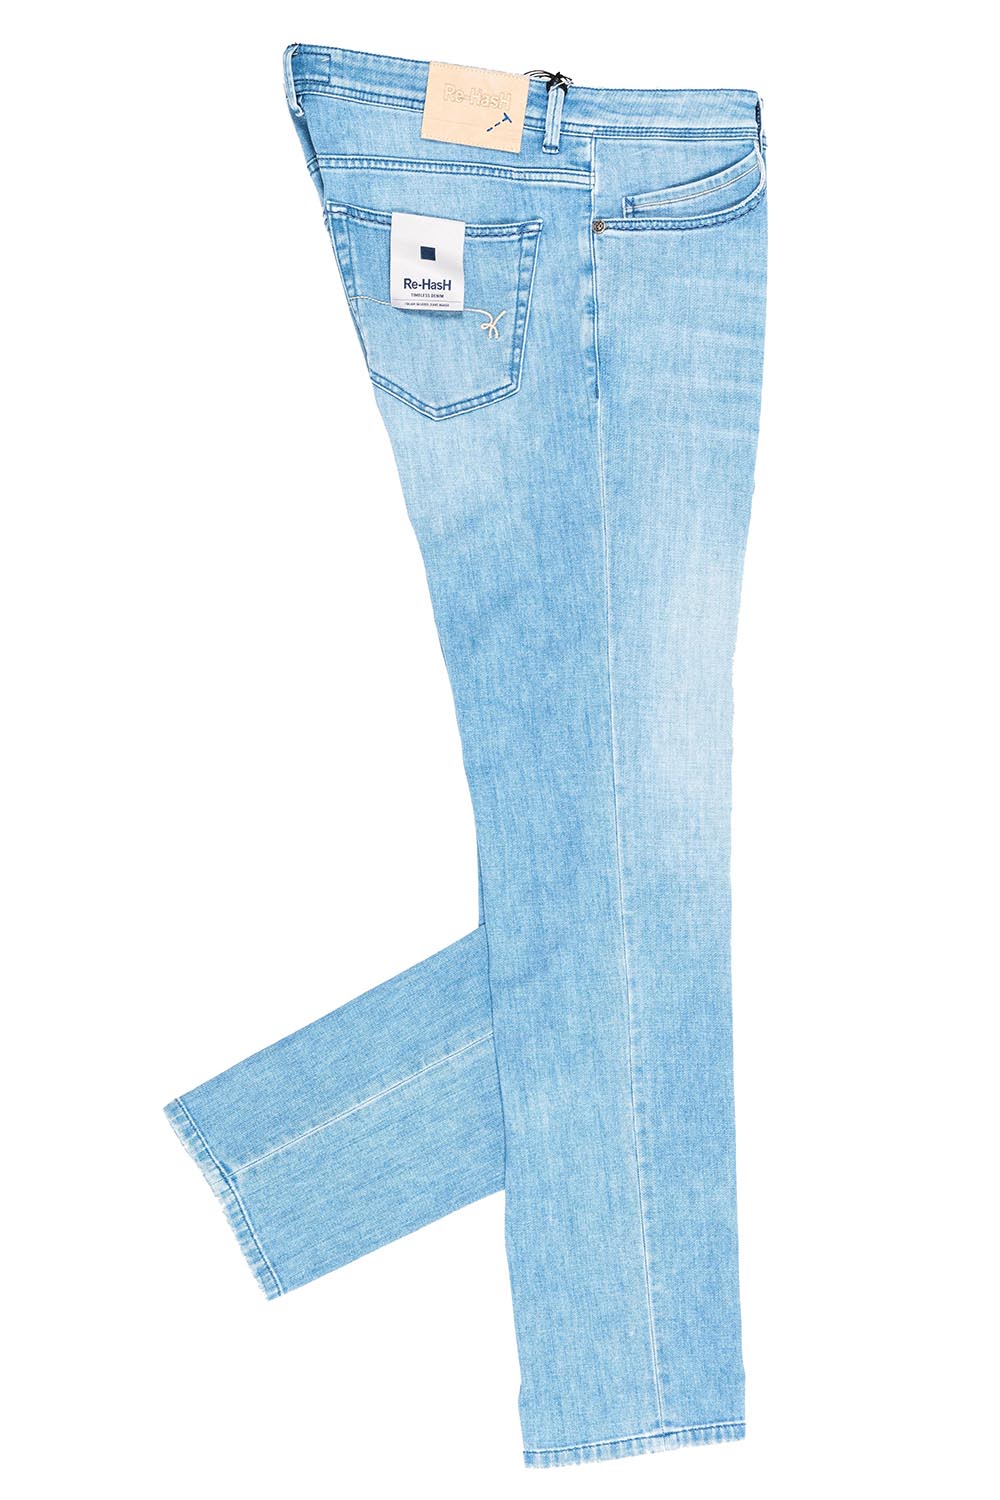 Re-Hash Washed Jeans - Bleu